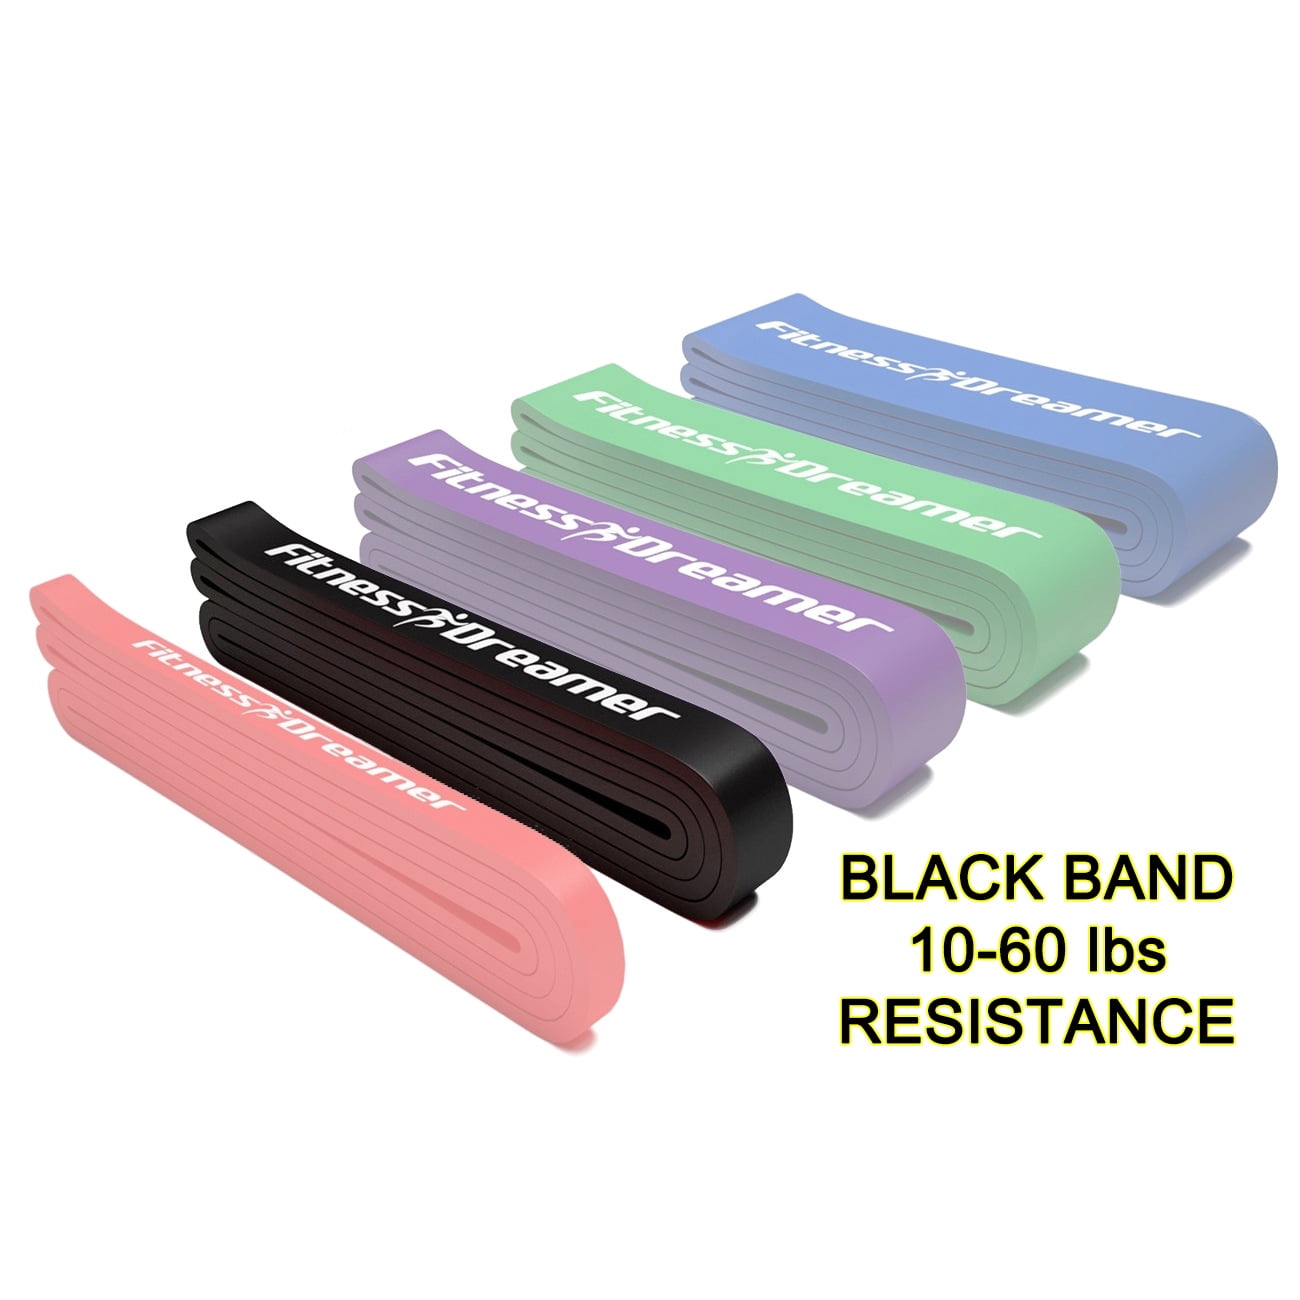 Details about   US STOCK Yoga Resistance Band Power Assist Loop For Gym Exercise Fitness Workout 